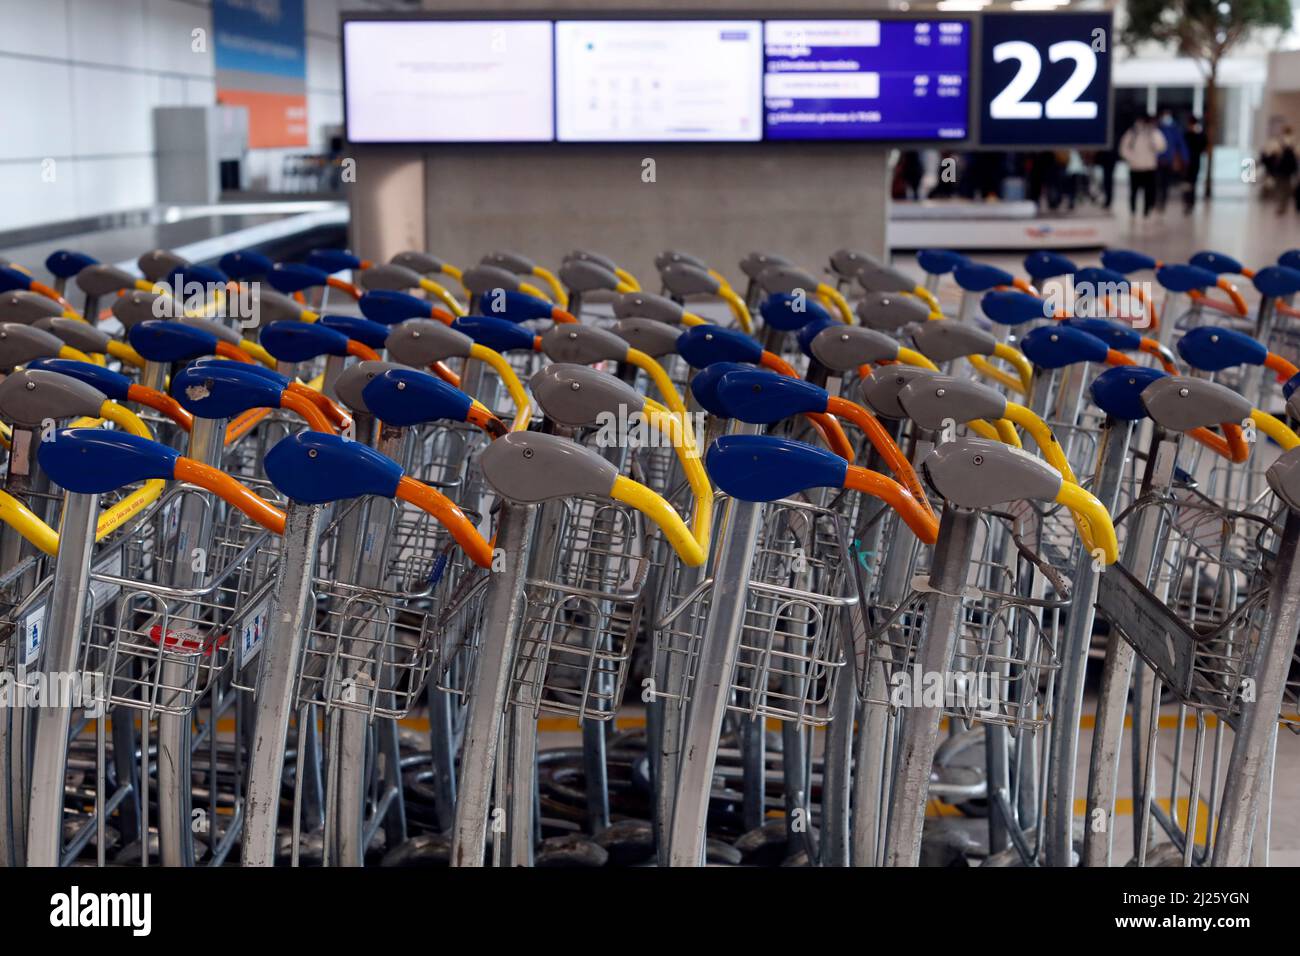 Charles de Gaulle Airport.  Baggage trolleys in arrivals area. Stock Photo